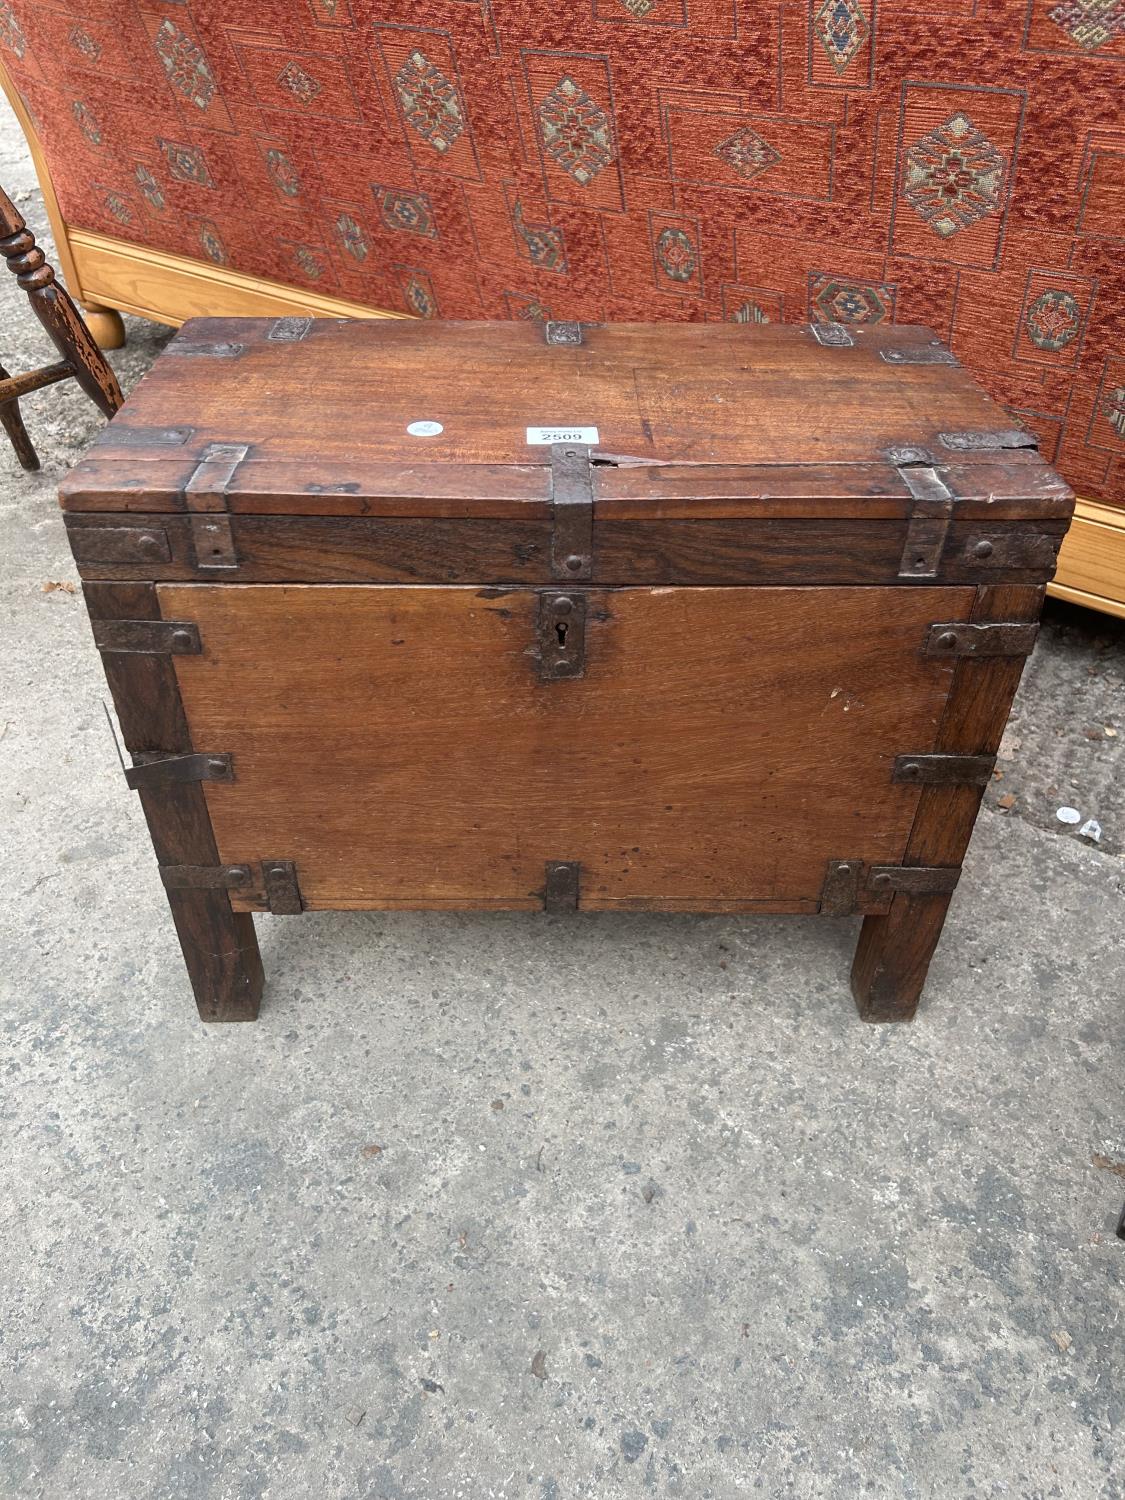 A SMALL HARD WOOD METAL BOUND TRUNK ON LEGS